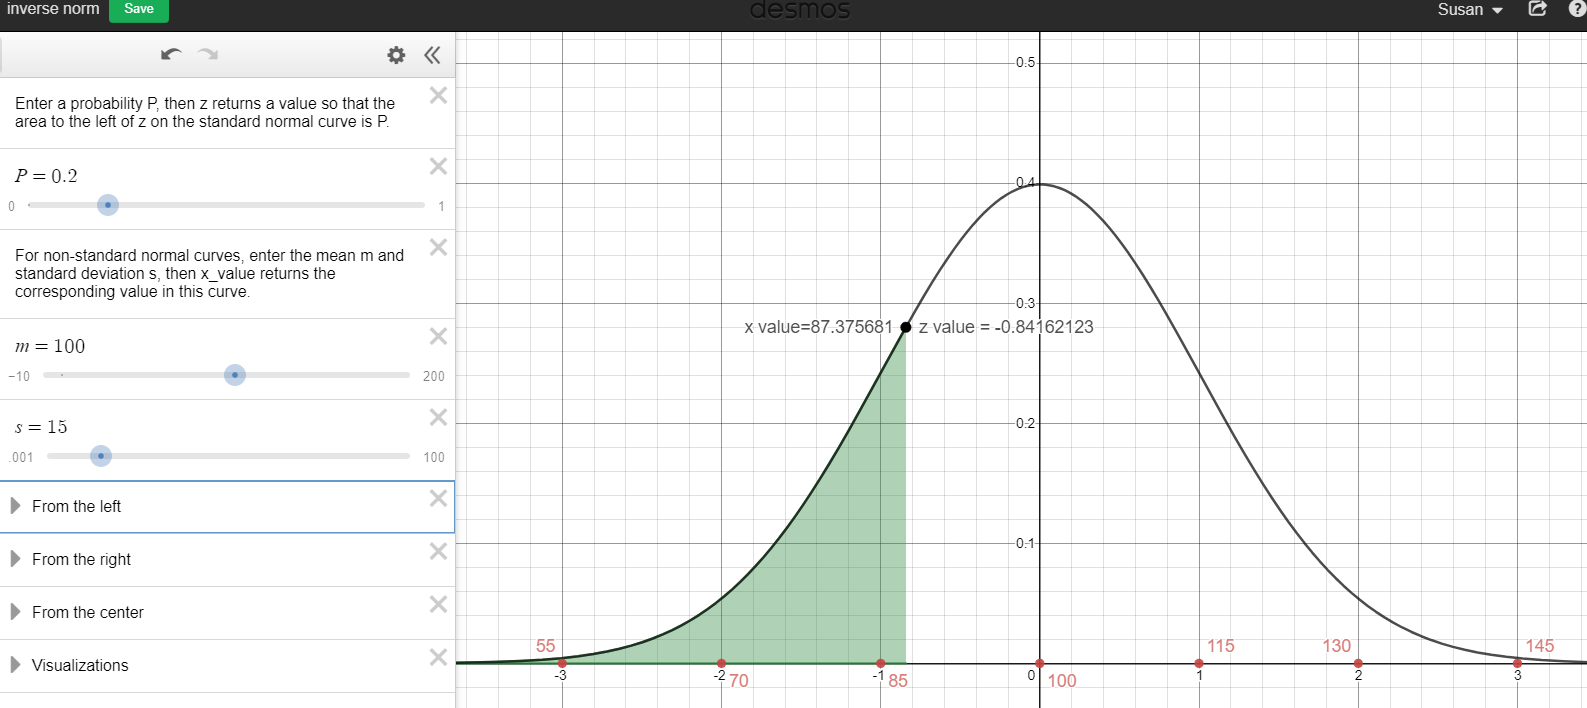 A normal curve with the mean of 100 at the highest point of the curve. The horizontal axis is labeled with 3 standard deviations to the left and to the right of the mean. The labels are 55, 70, 85, 100, 115, 130, and 145. In the left margin of the graph it is stated that p=.2, mean = 100 and standard deviation = 15. The calculated z value is -0.84162. The calculated x value is 87.38. The area under the curve is shaded to the left of the x value. 